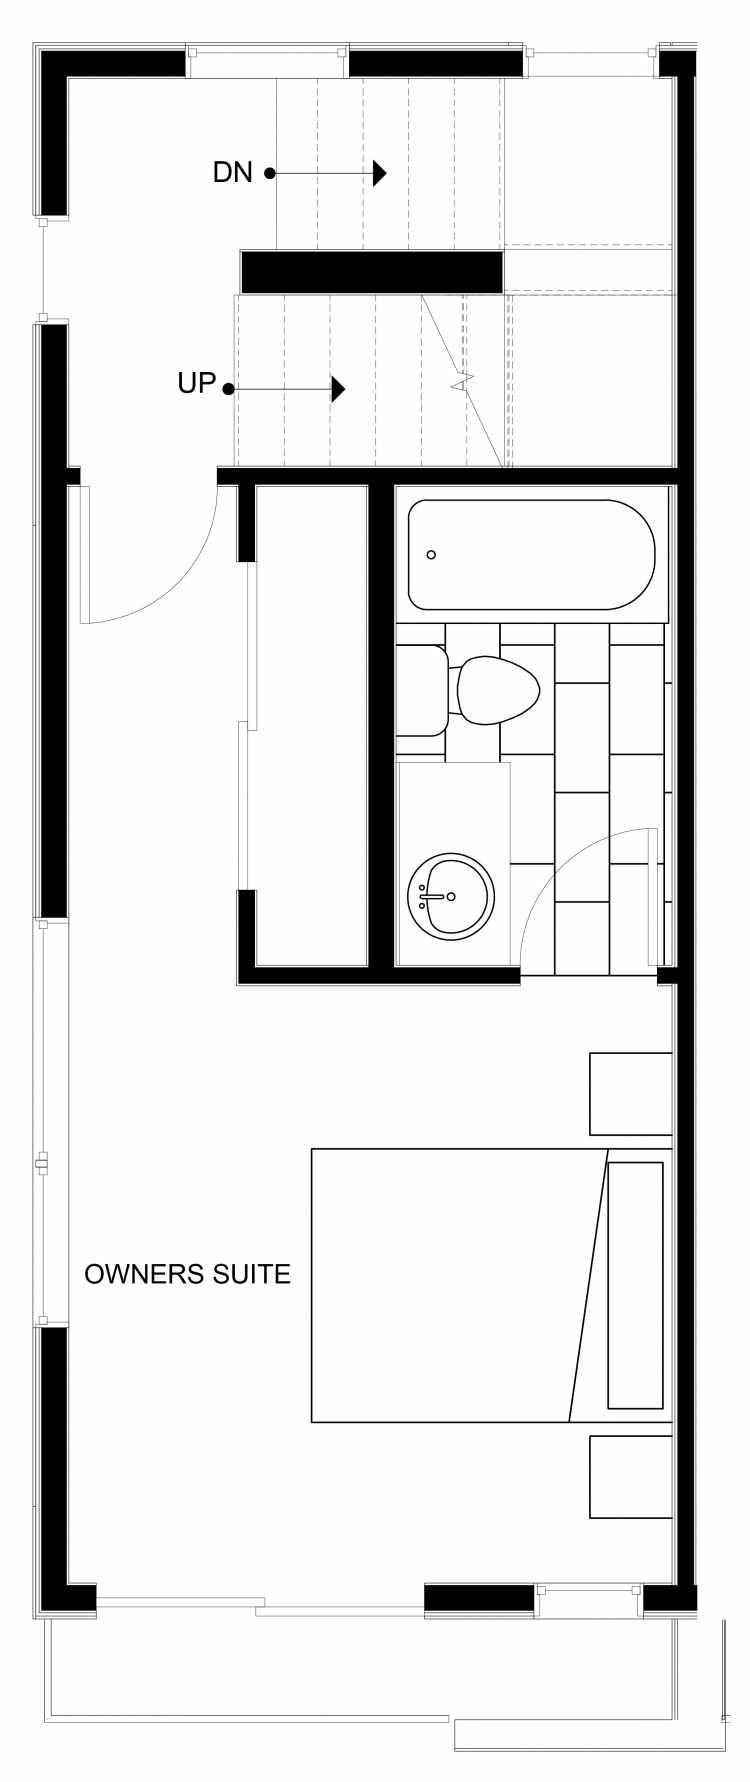 Fourth Floor Plan of 1544 15th Ave E, One of the Grandview Townhomes in Capitol Hill